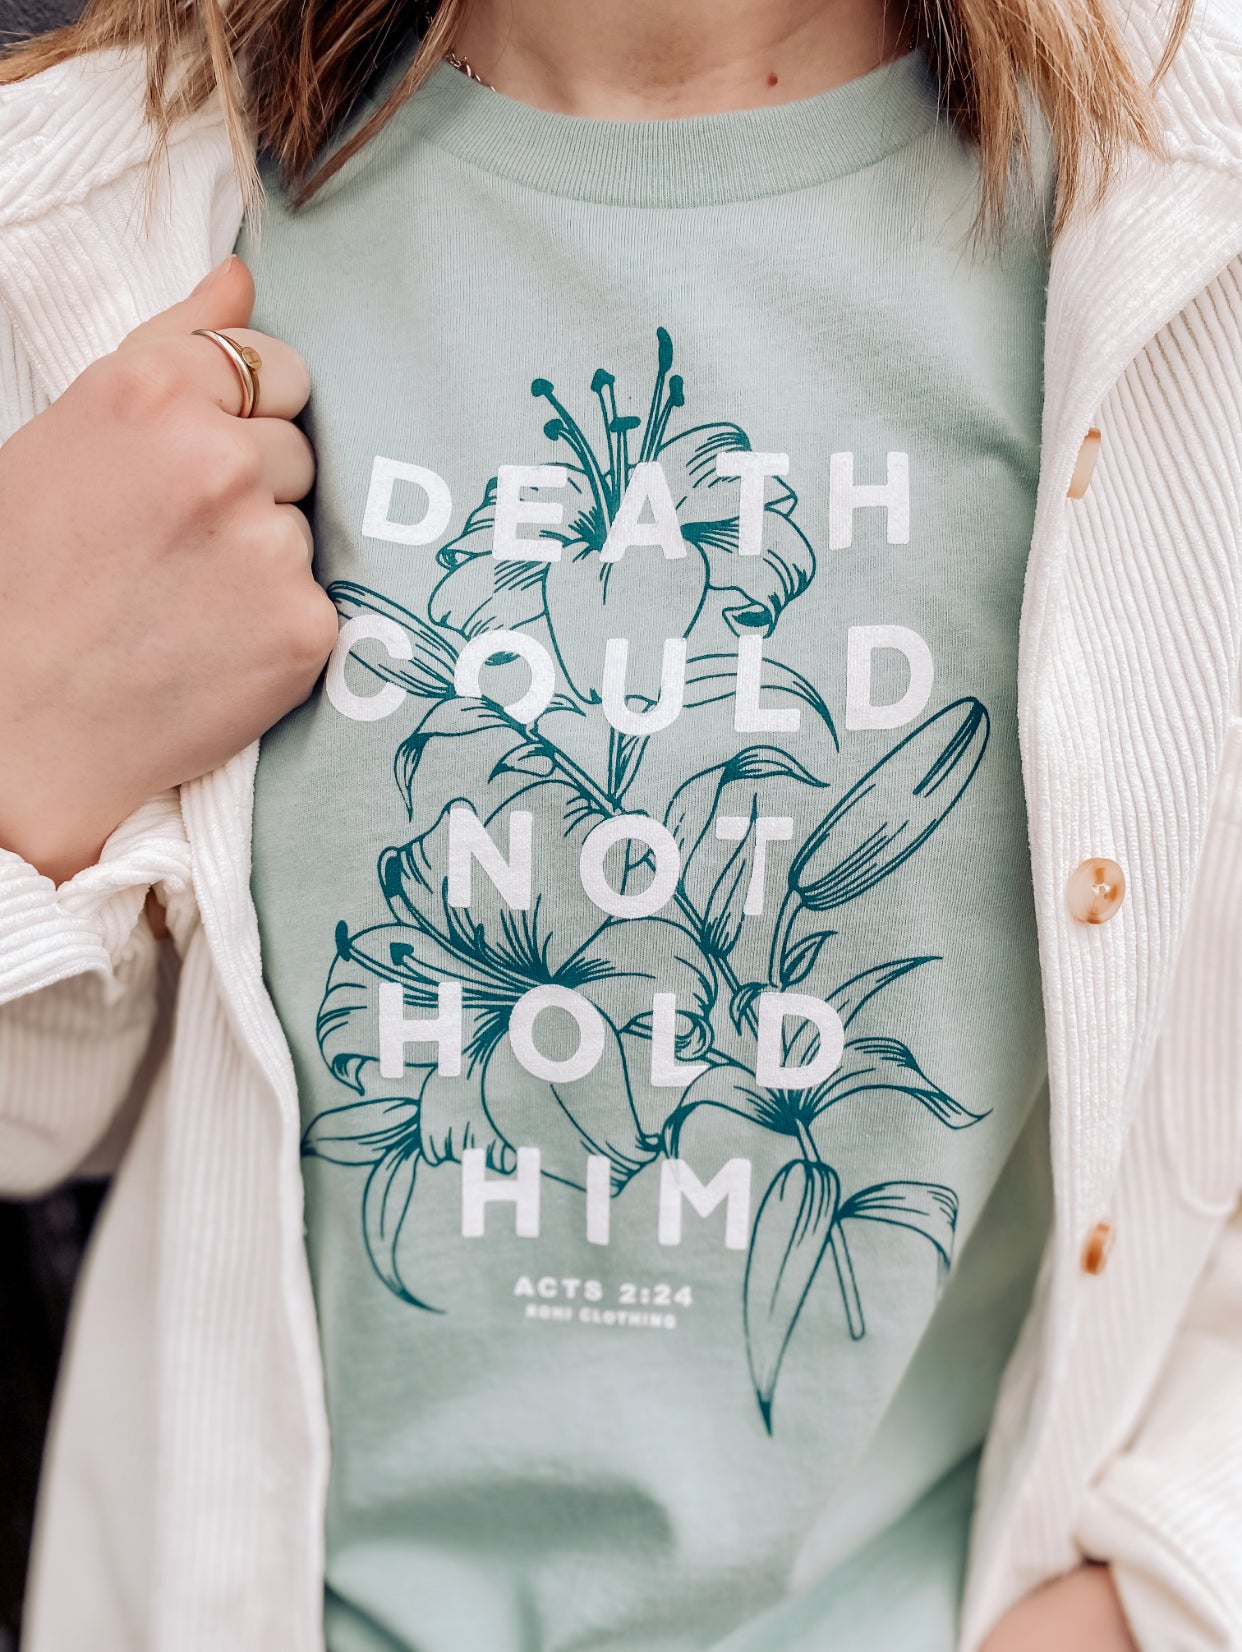 Death Could Not Hold Him Tee